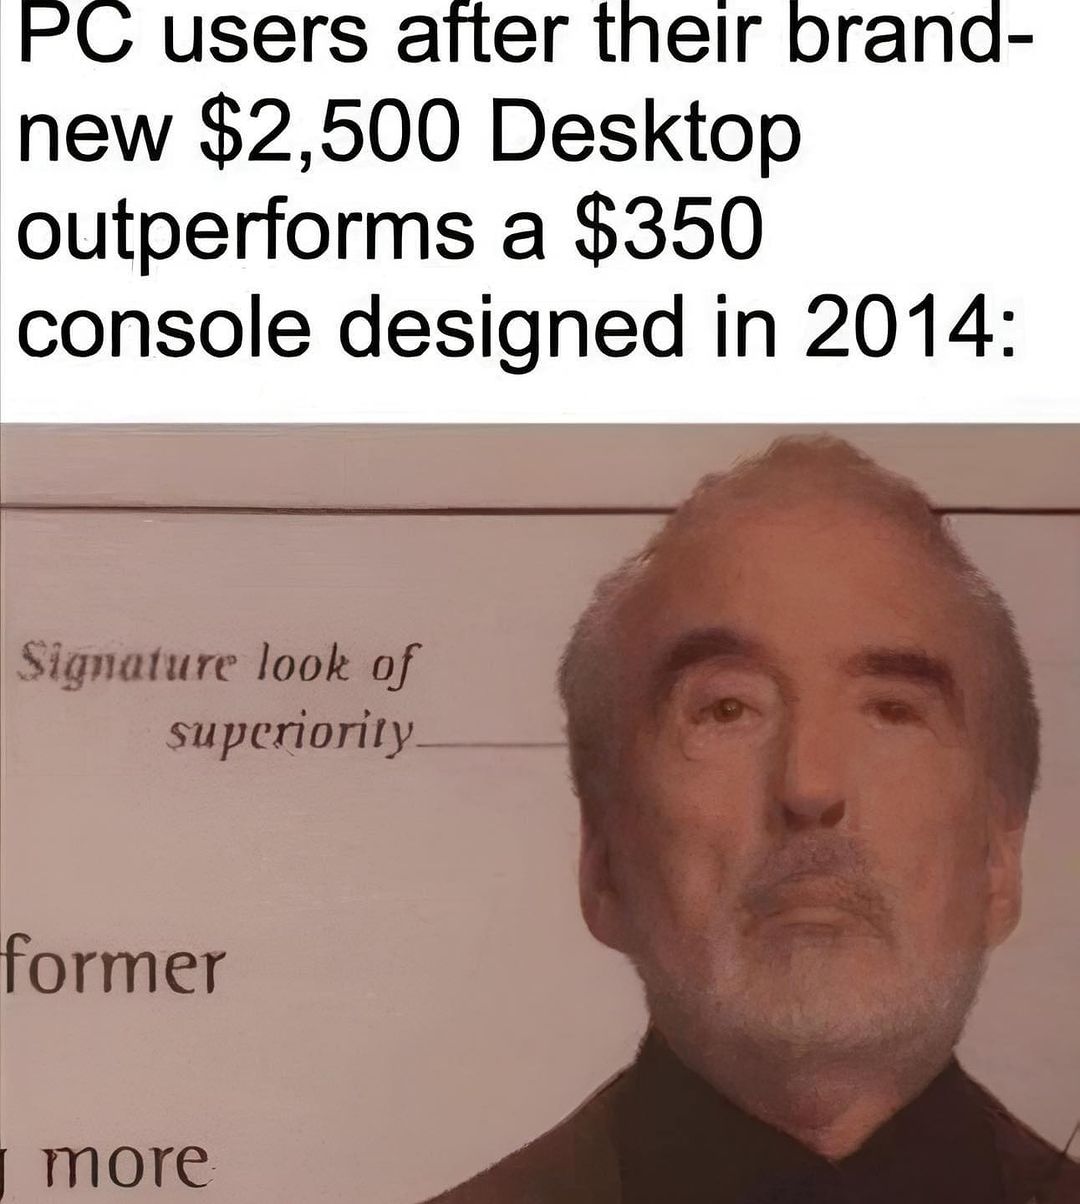 PC users after their brand-new $2,500 Desktop outperforms a $350 console designed in 2014:  Signature look of superiority.